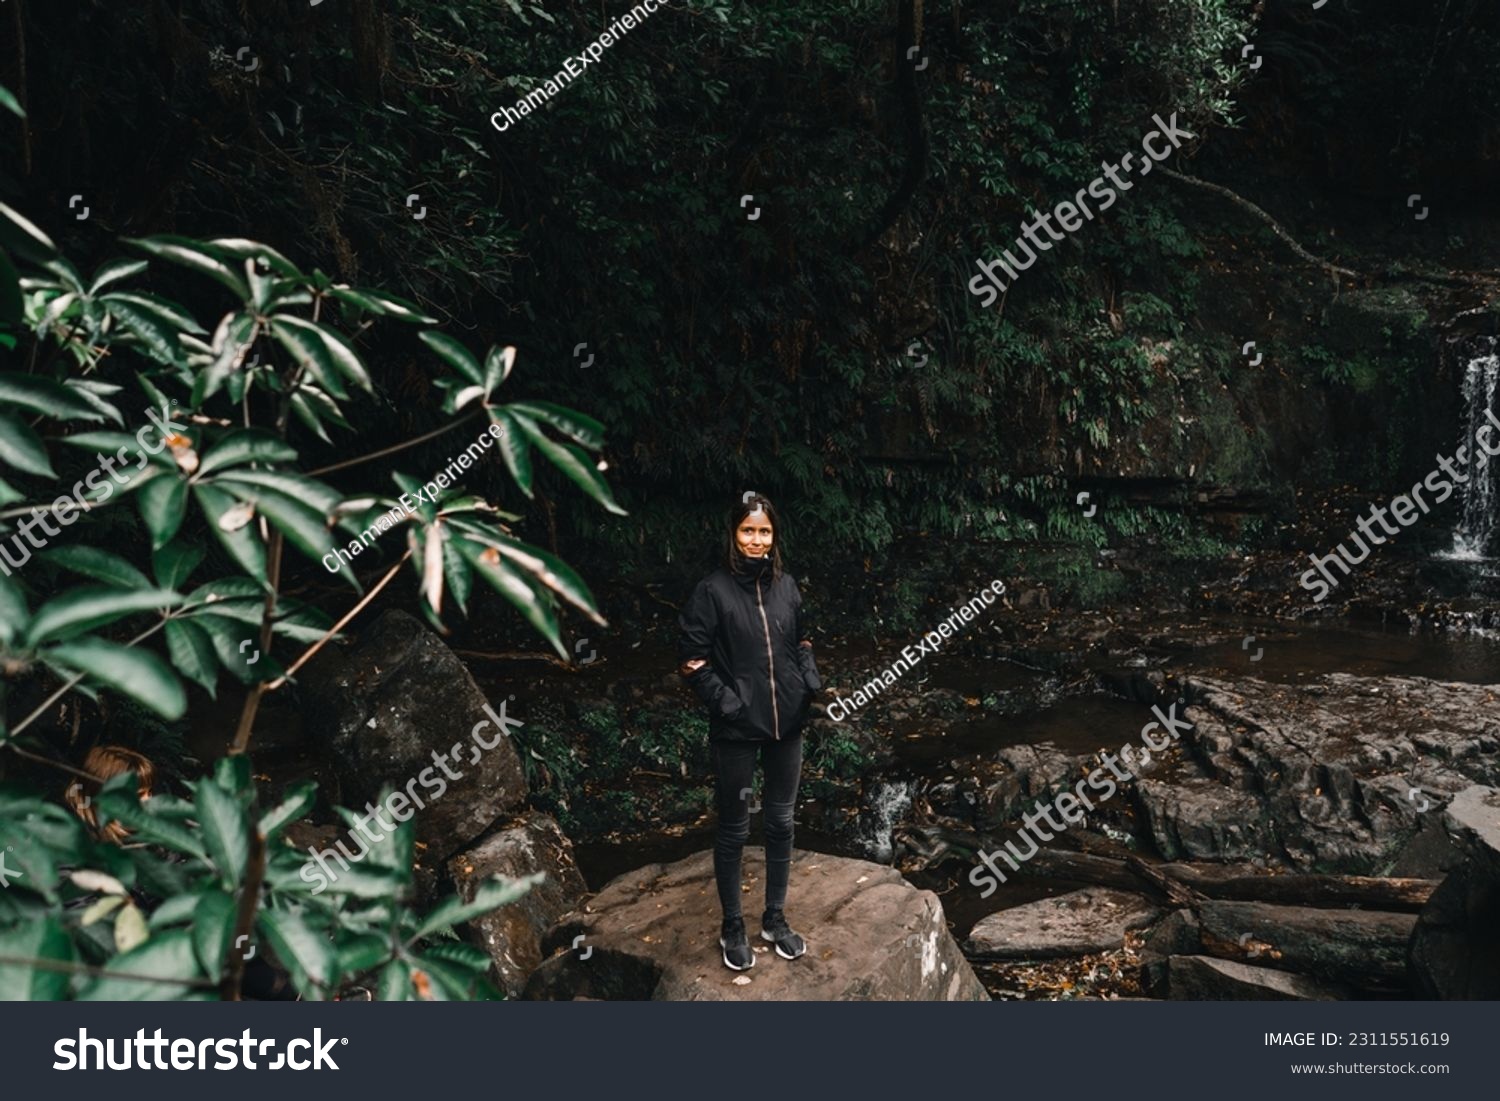 brunette caucasian girl in black jacket dark trousers and sneakers smiling at camera standing on big rock among waterfalls and forest vegetation,purakaunui falls, new zealand #2311551619